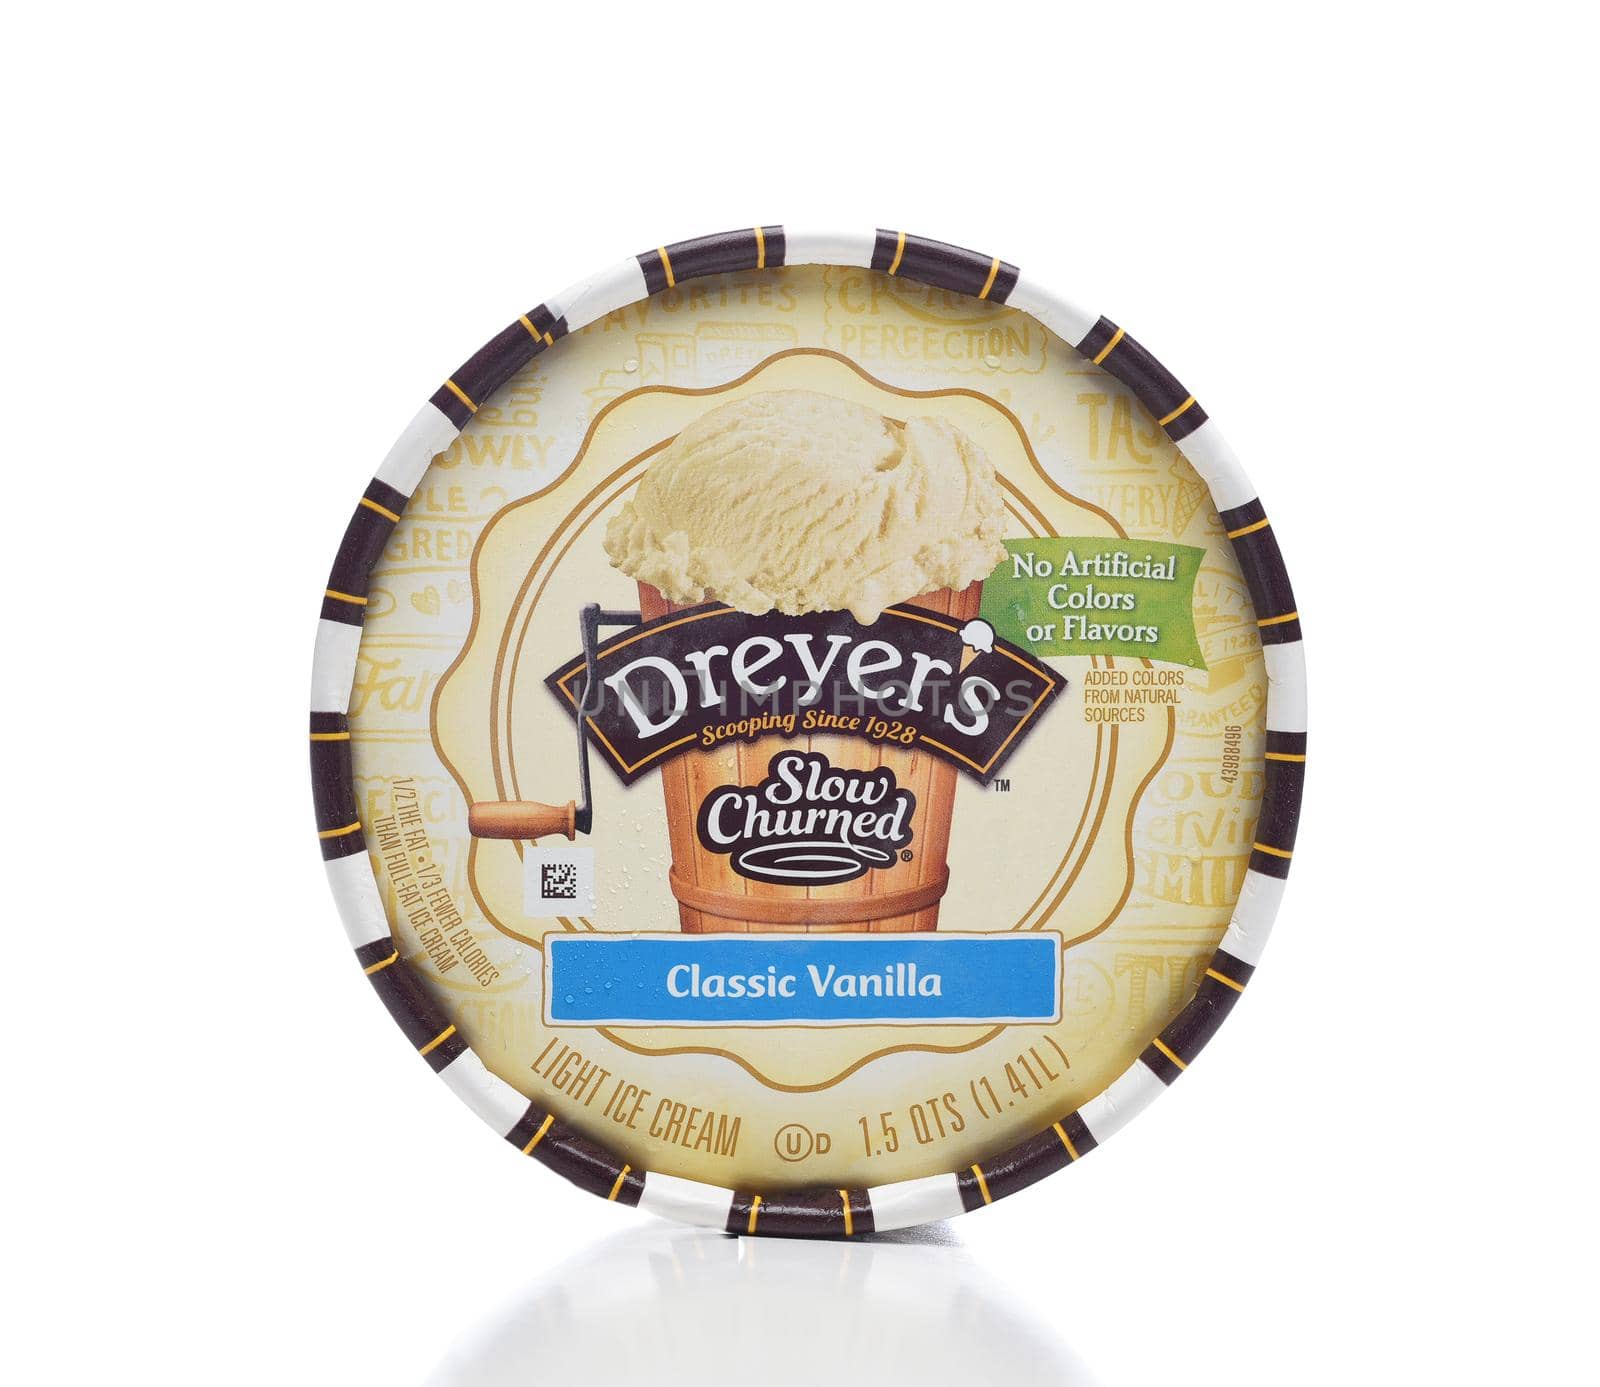 IRIVNE, CALIFORNIA - 4 JULY 2021: A Carton of Dreyers Slow Churned Classic Vanilla Ice Cream, top view of the lid. by sCukrov